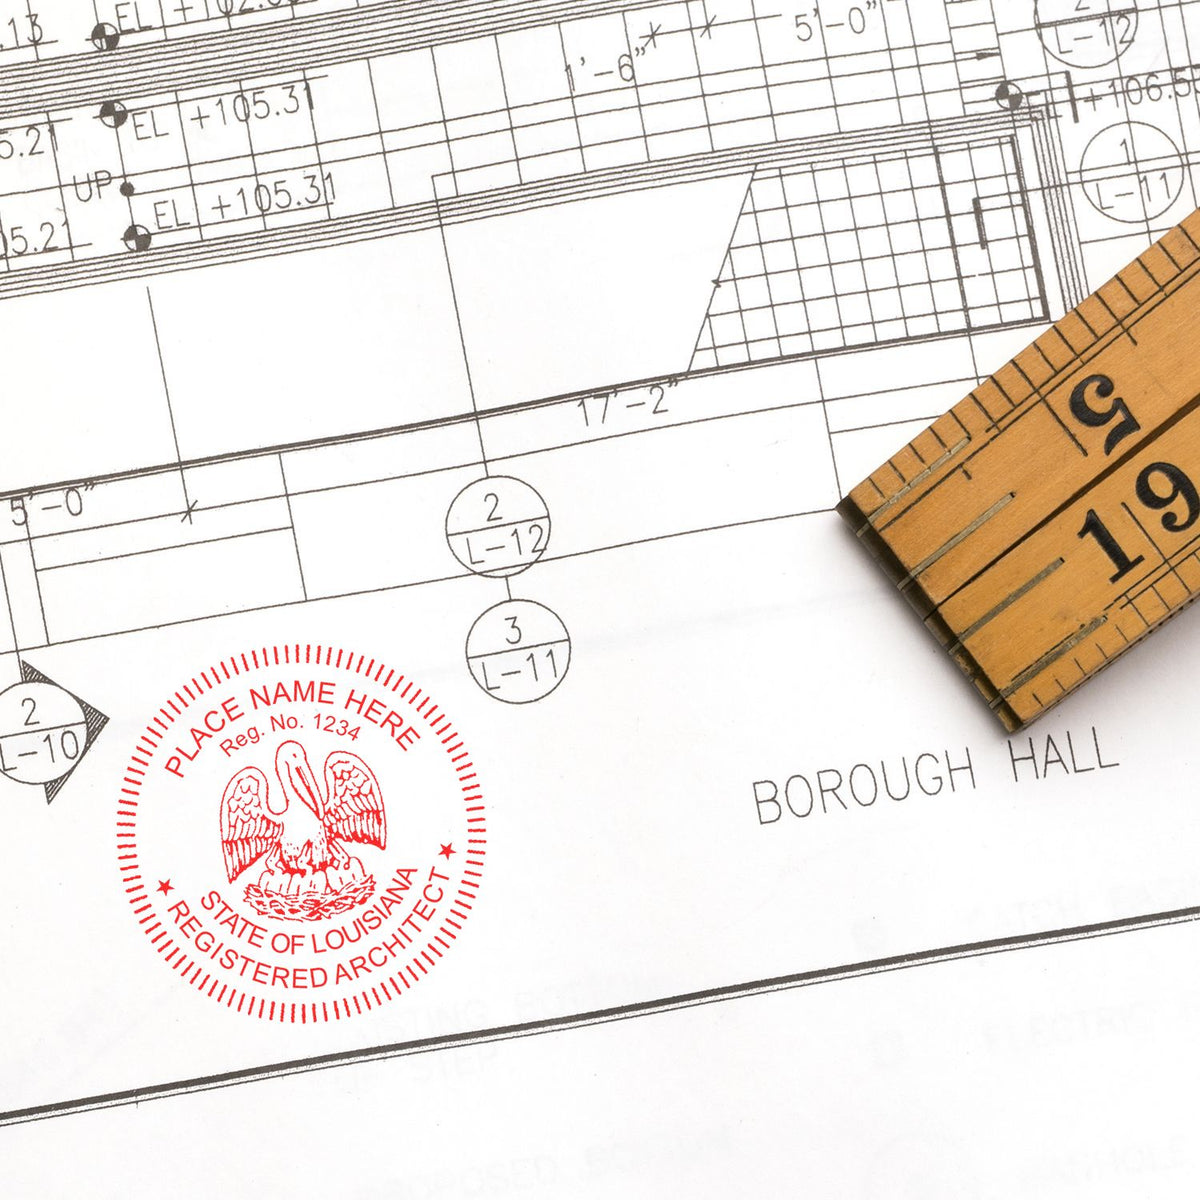 The Slim Pre-Inked Louisiana Architect Seal Stamp stamp impression comes to life with a crisp, detailed photo on paper - showcasing true professional quality.